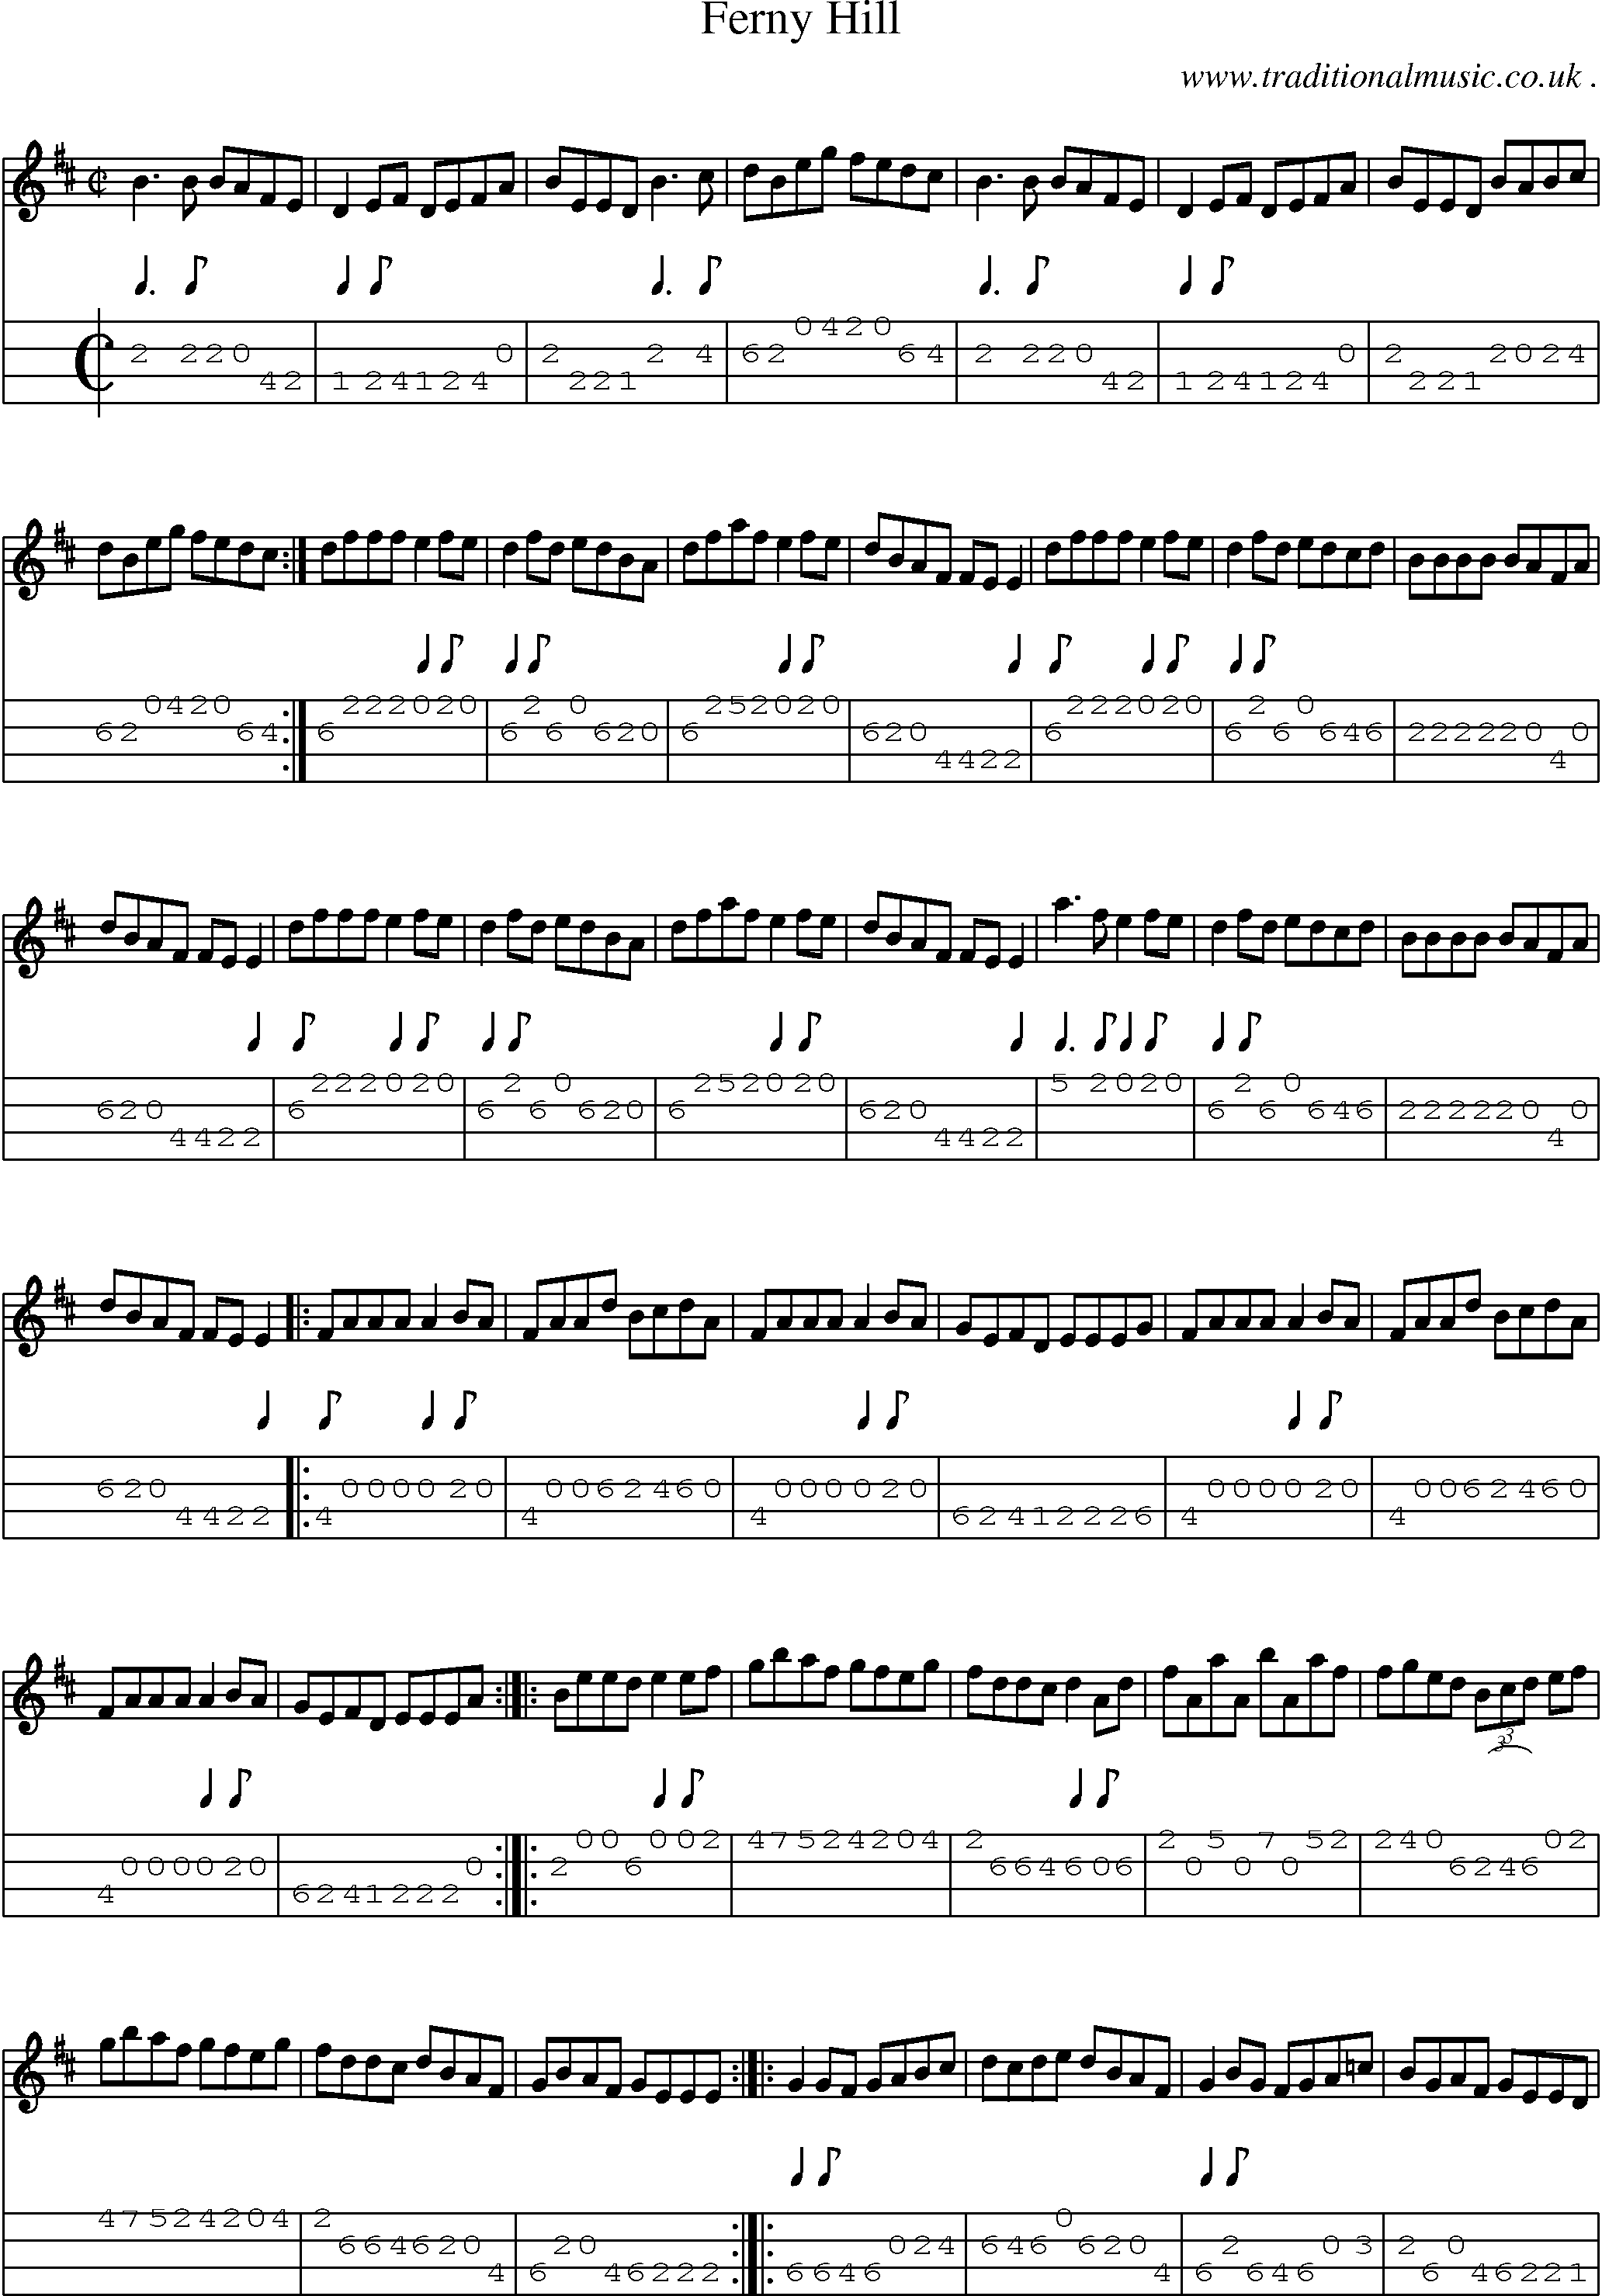 Sheet-Music and Mandolin Tabs for Ferny Hill